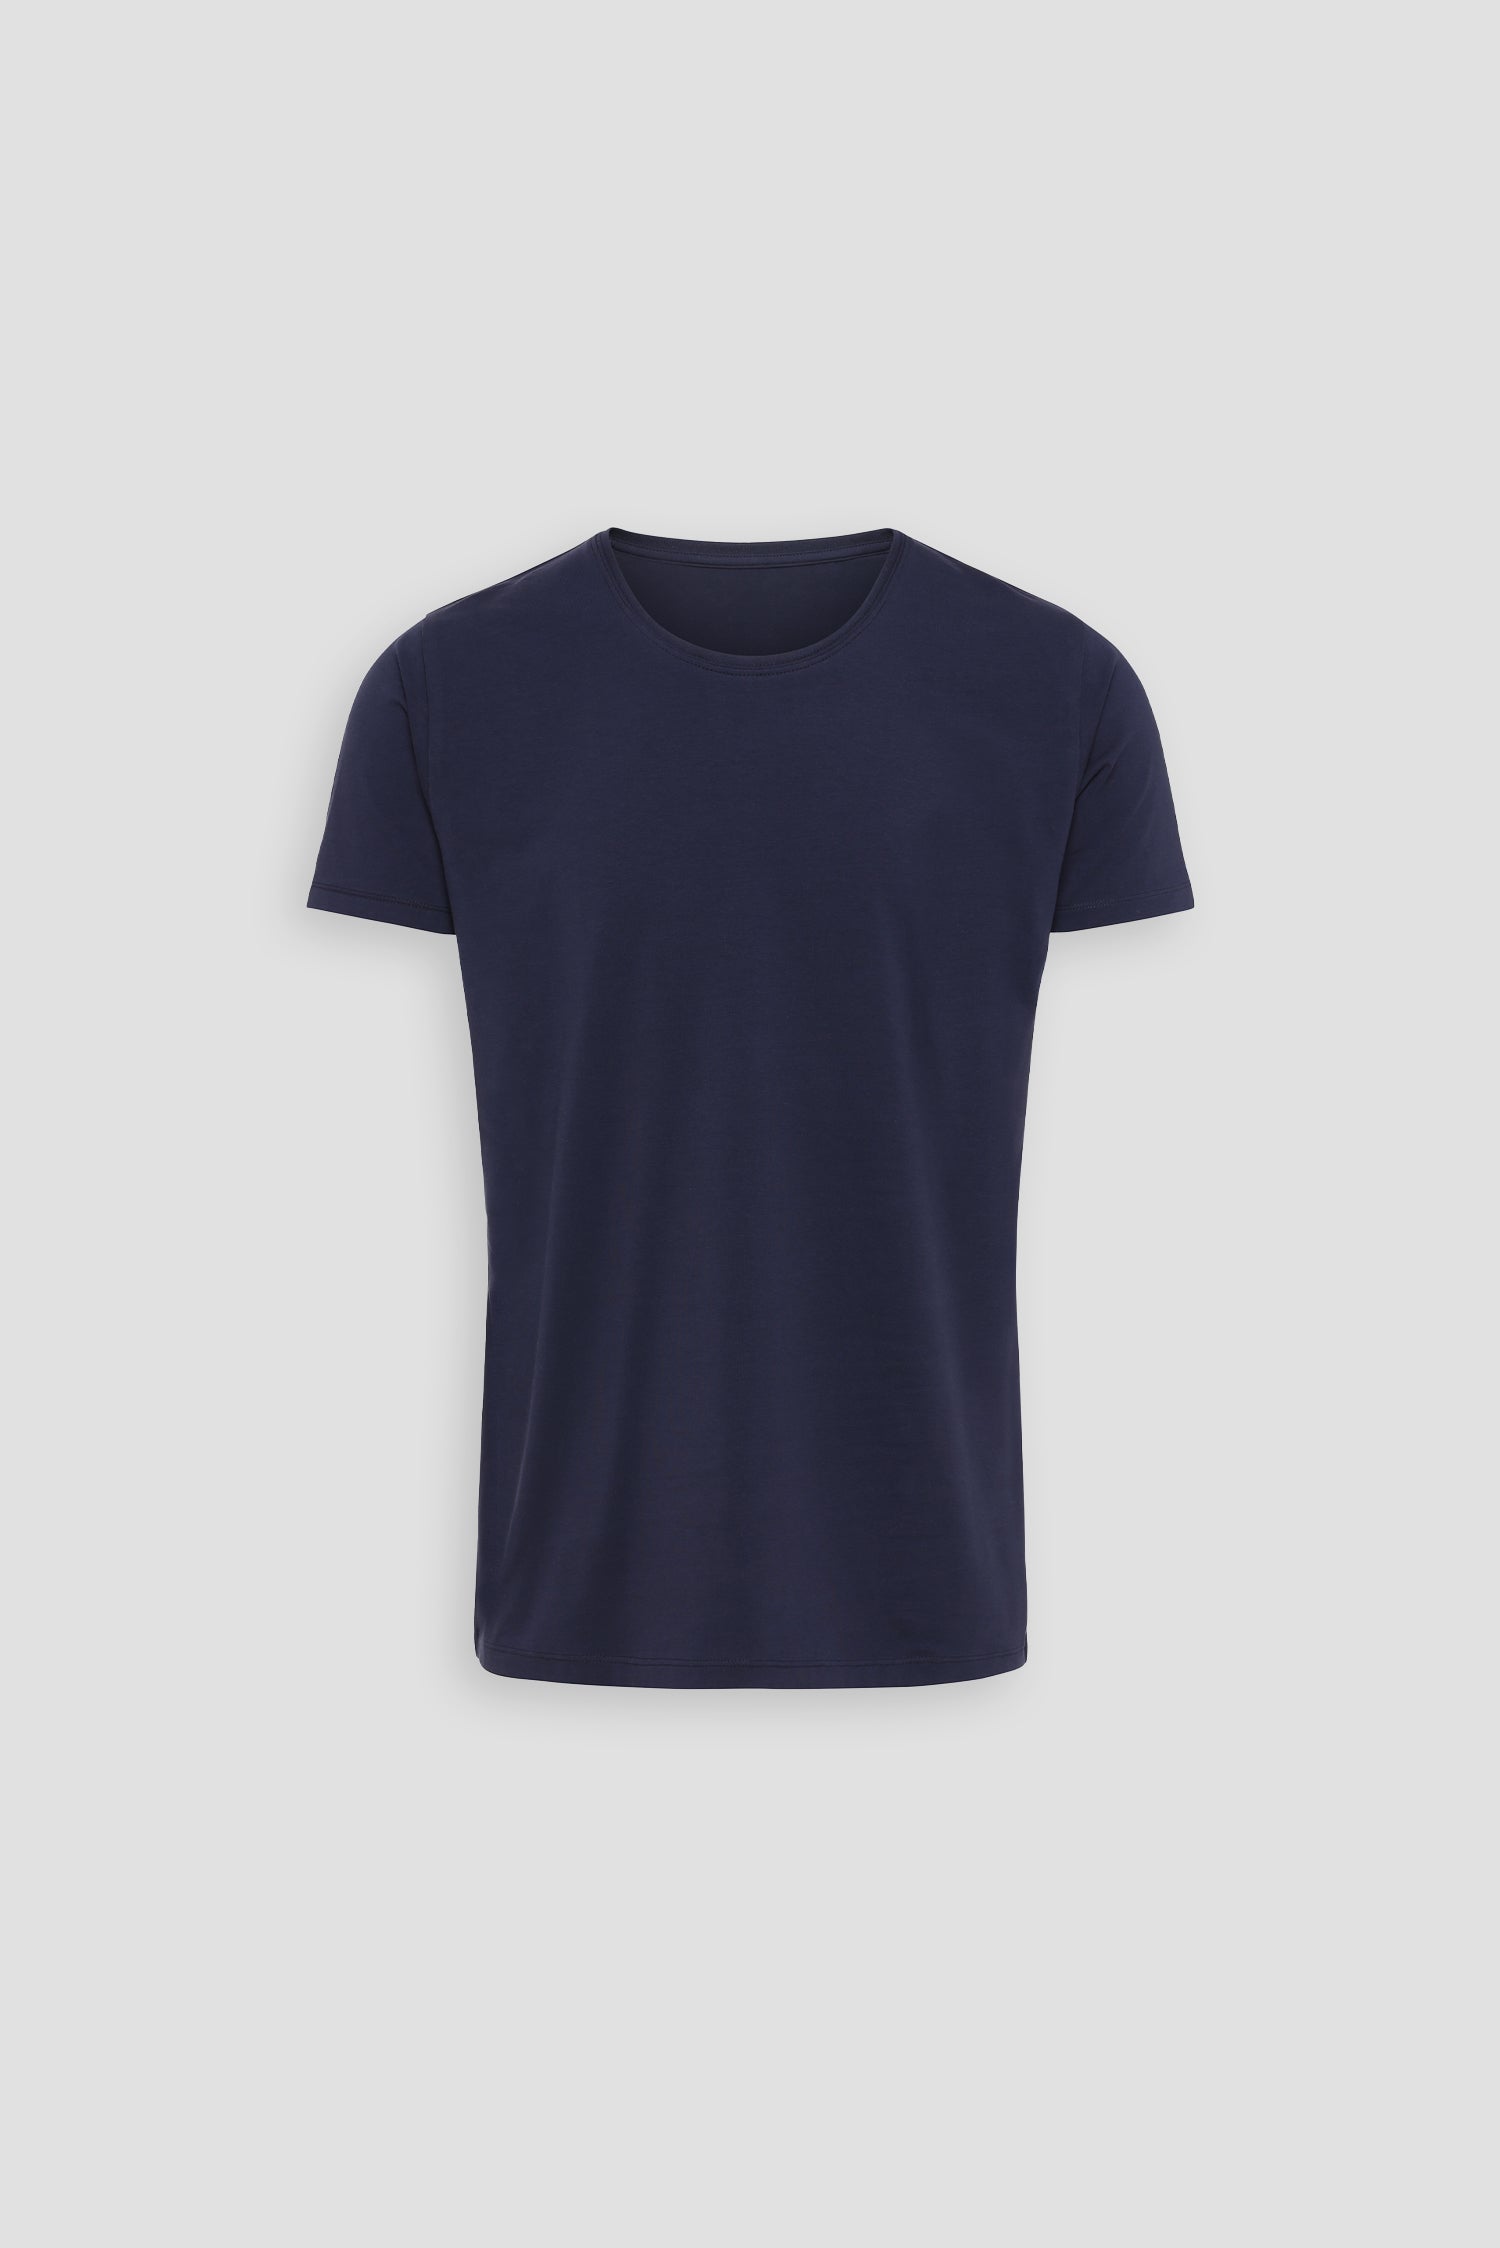 Muscle Fit T-shirt, Navy Blue